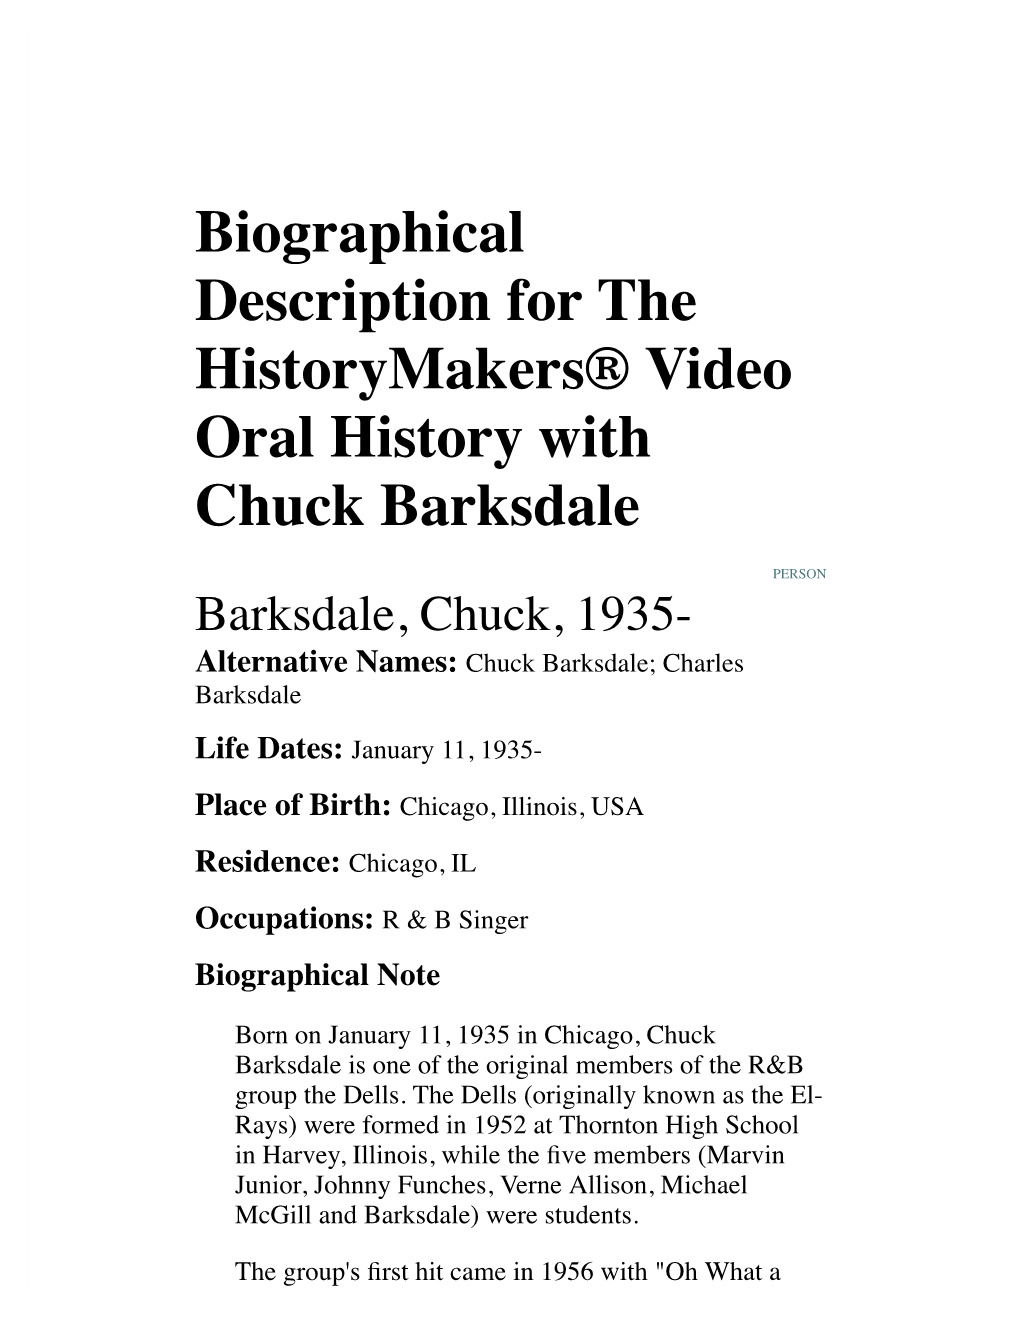 Biographical Description for the Historymakers® Video Oral History with Chuck Barksdale